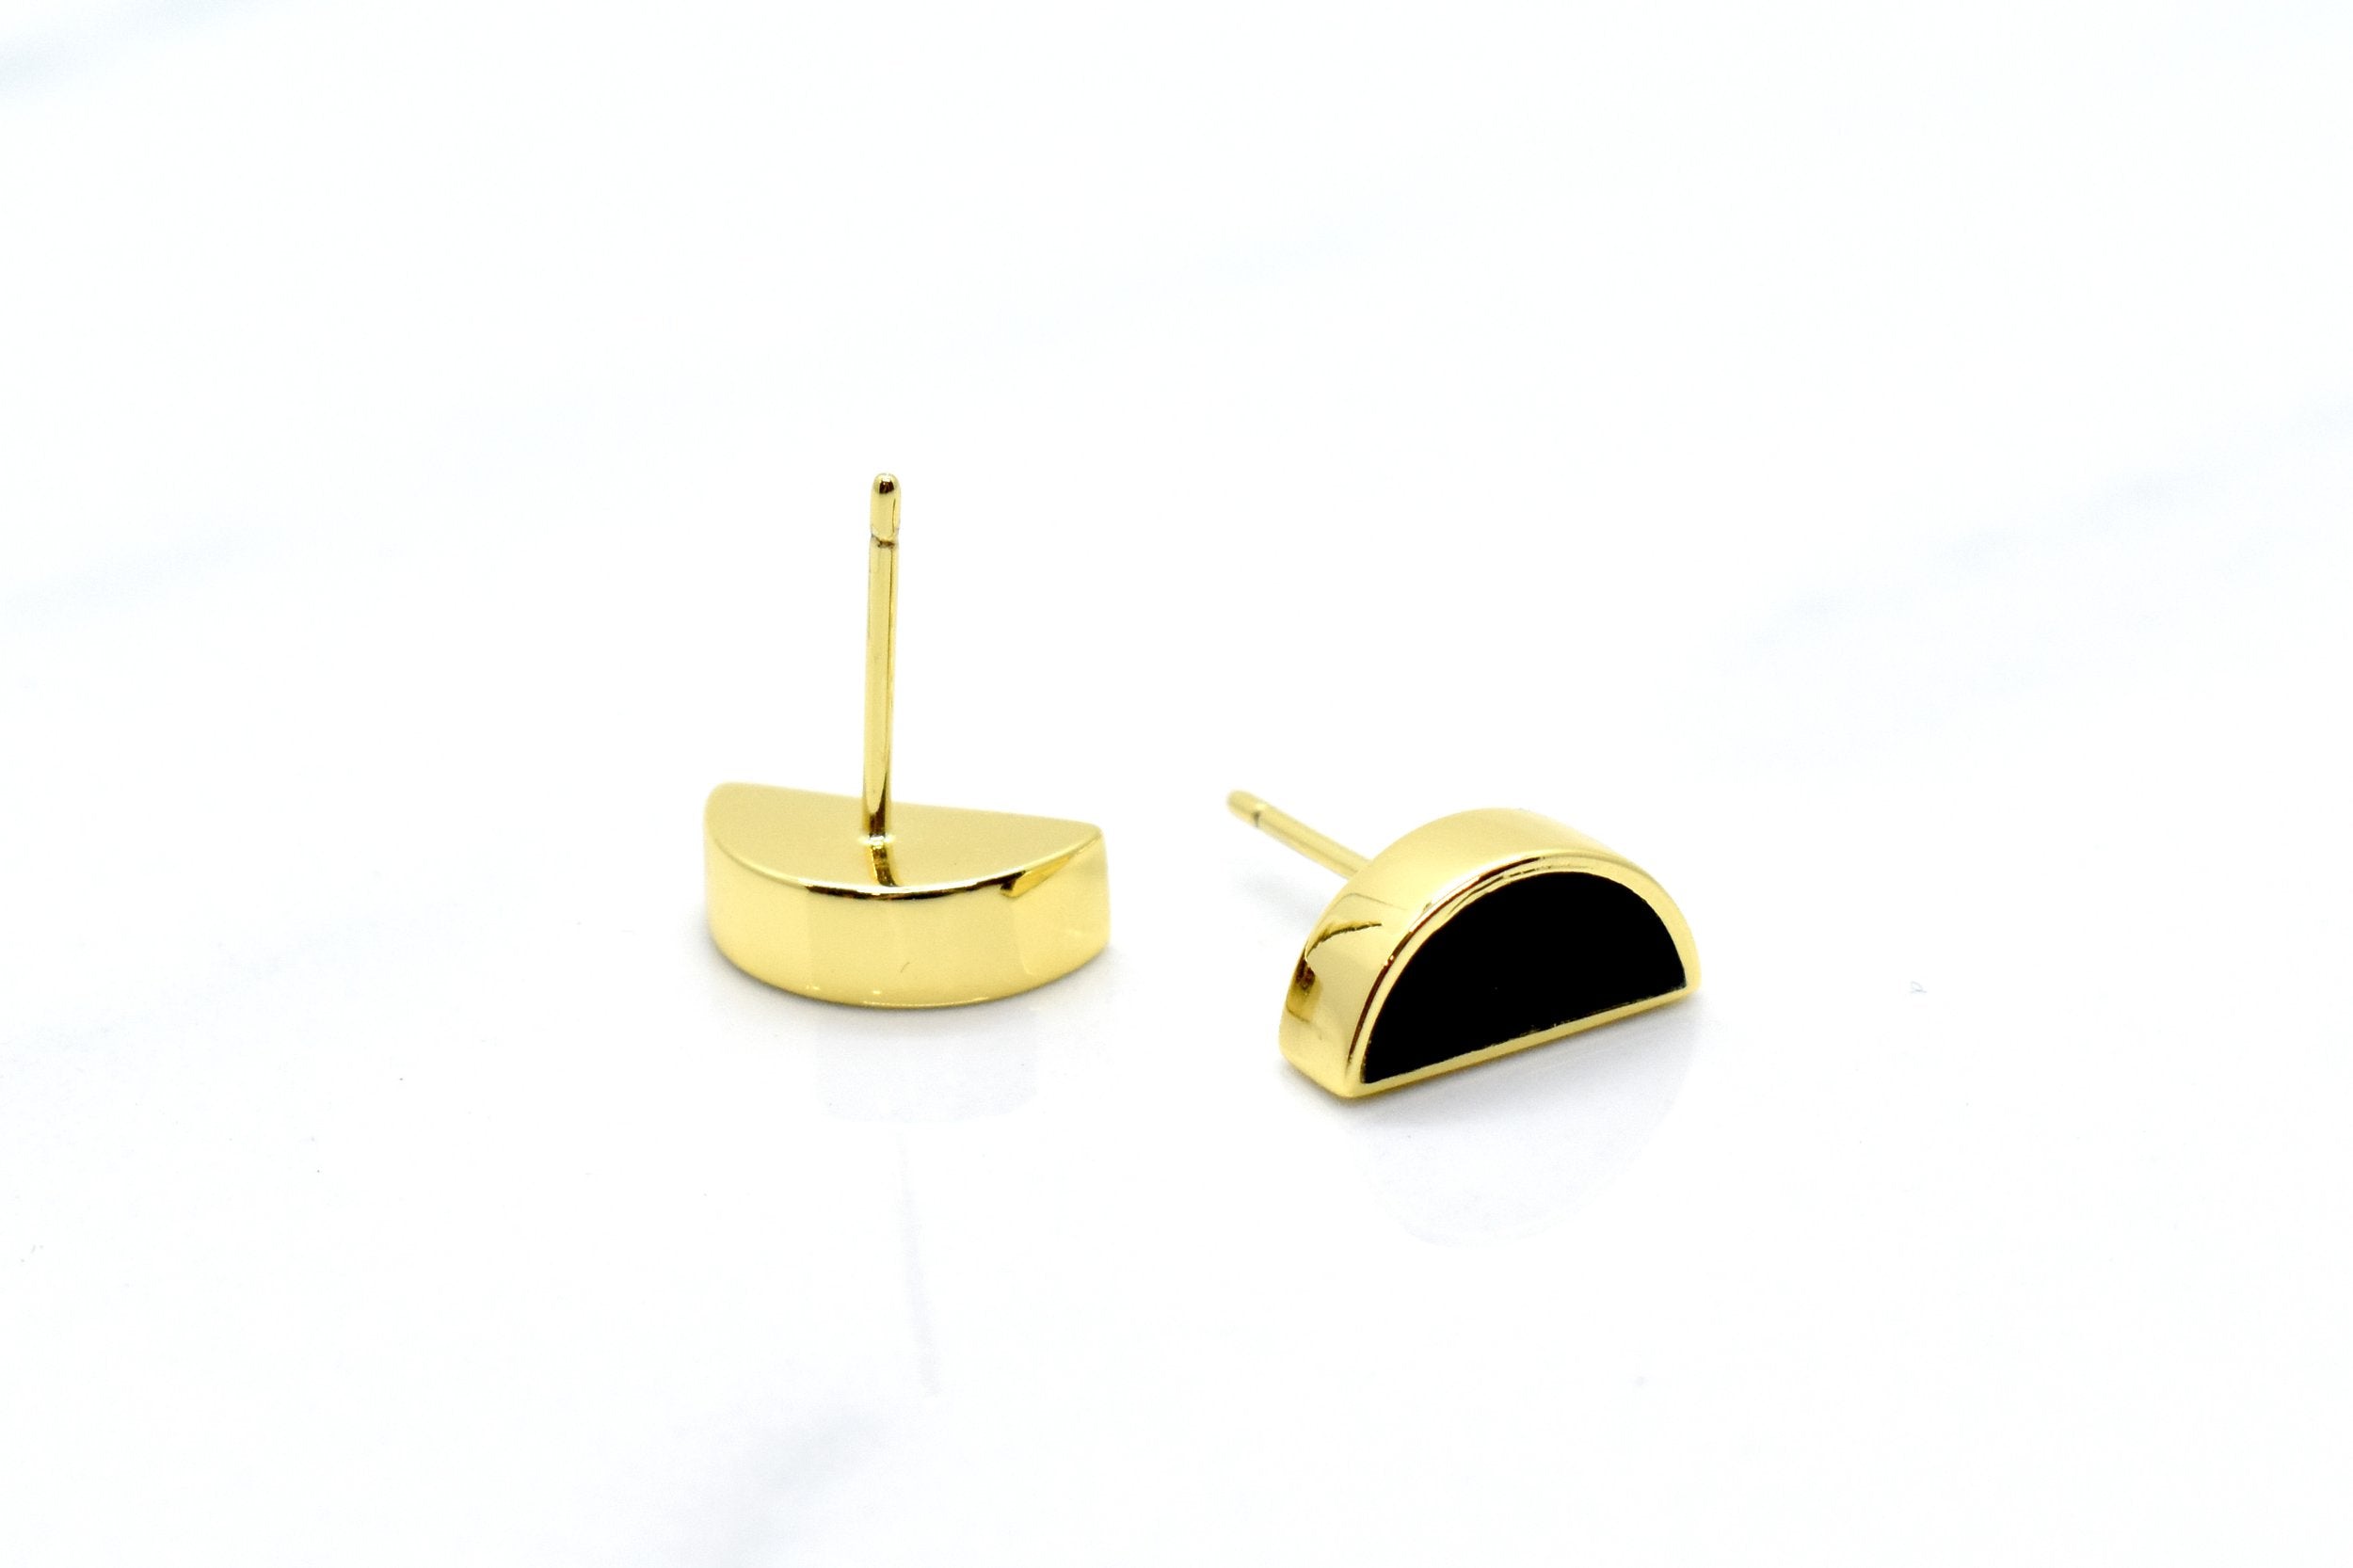 earring studs in gold 14k with black half moon stud set